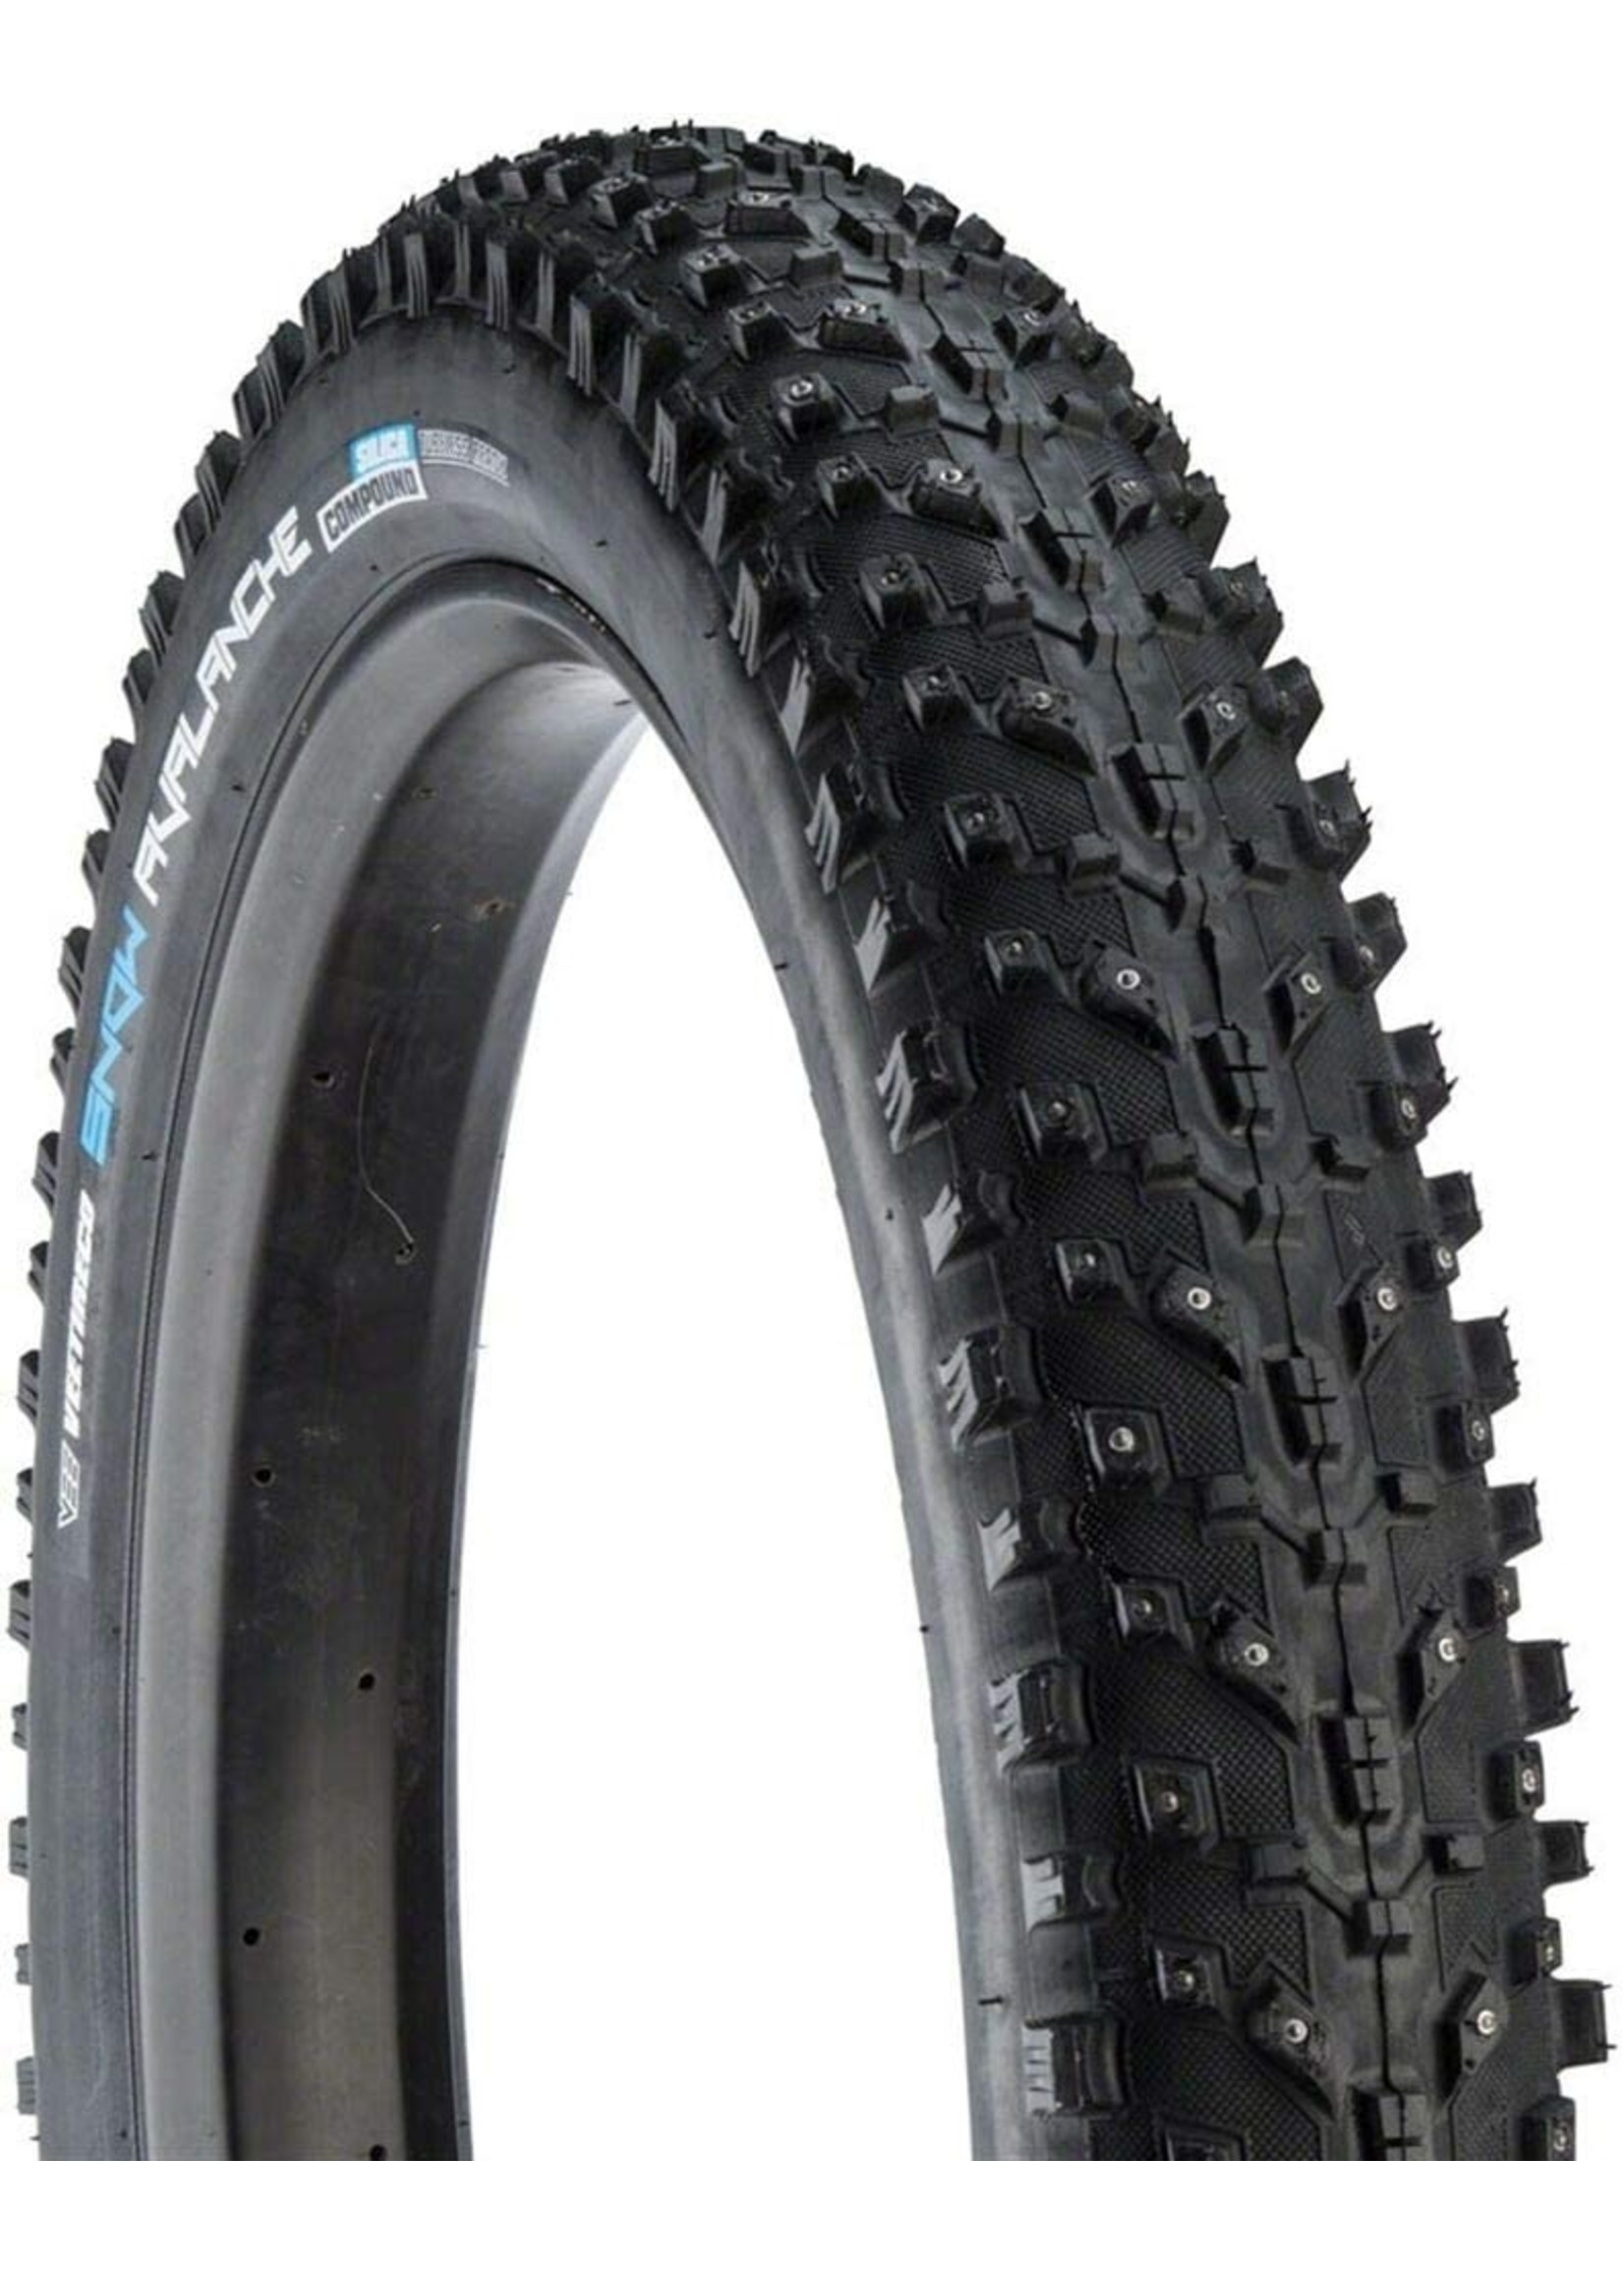 VEE RUBBER Vee Tire- Snow Avalanche Studded, 26 x 4.8